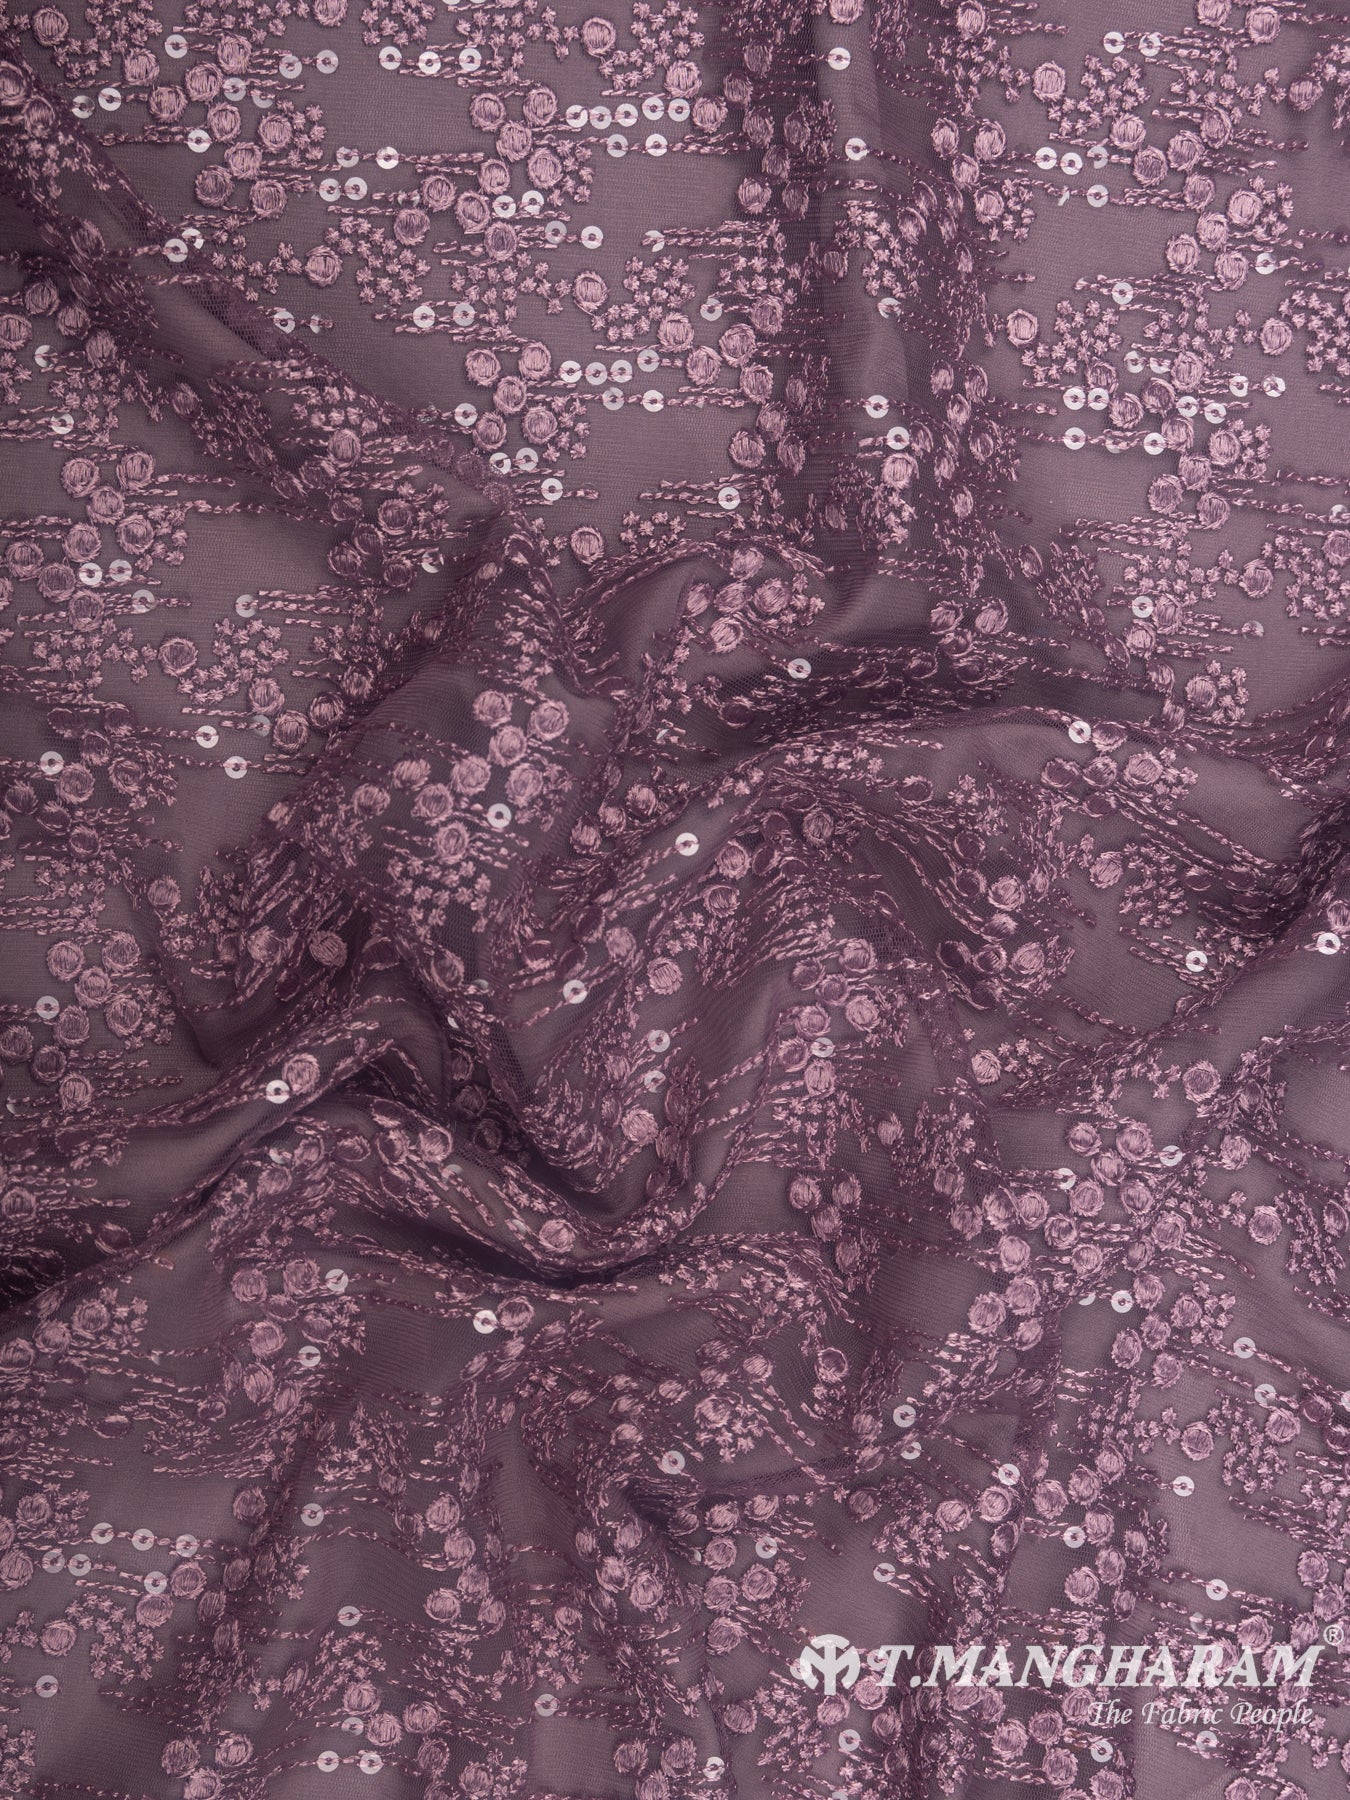 Violet Net Embroidery Fabric - EB4891 view-4